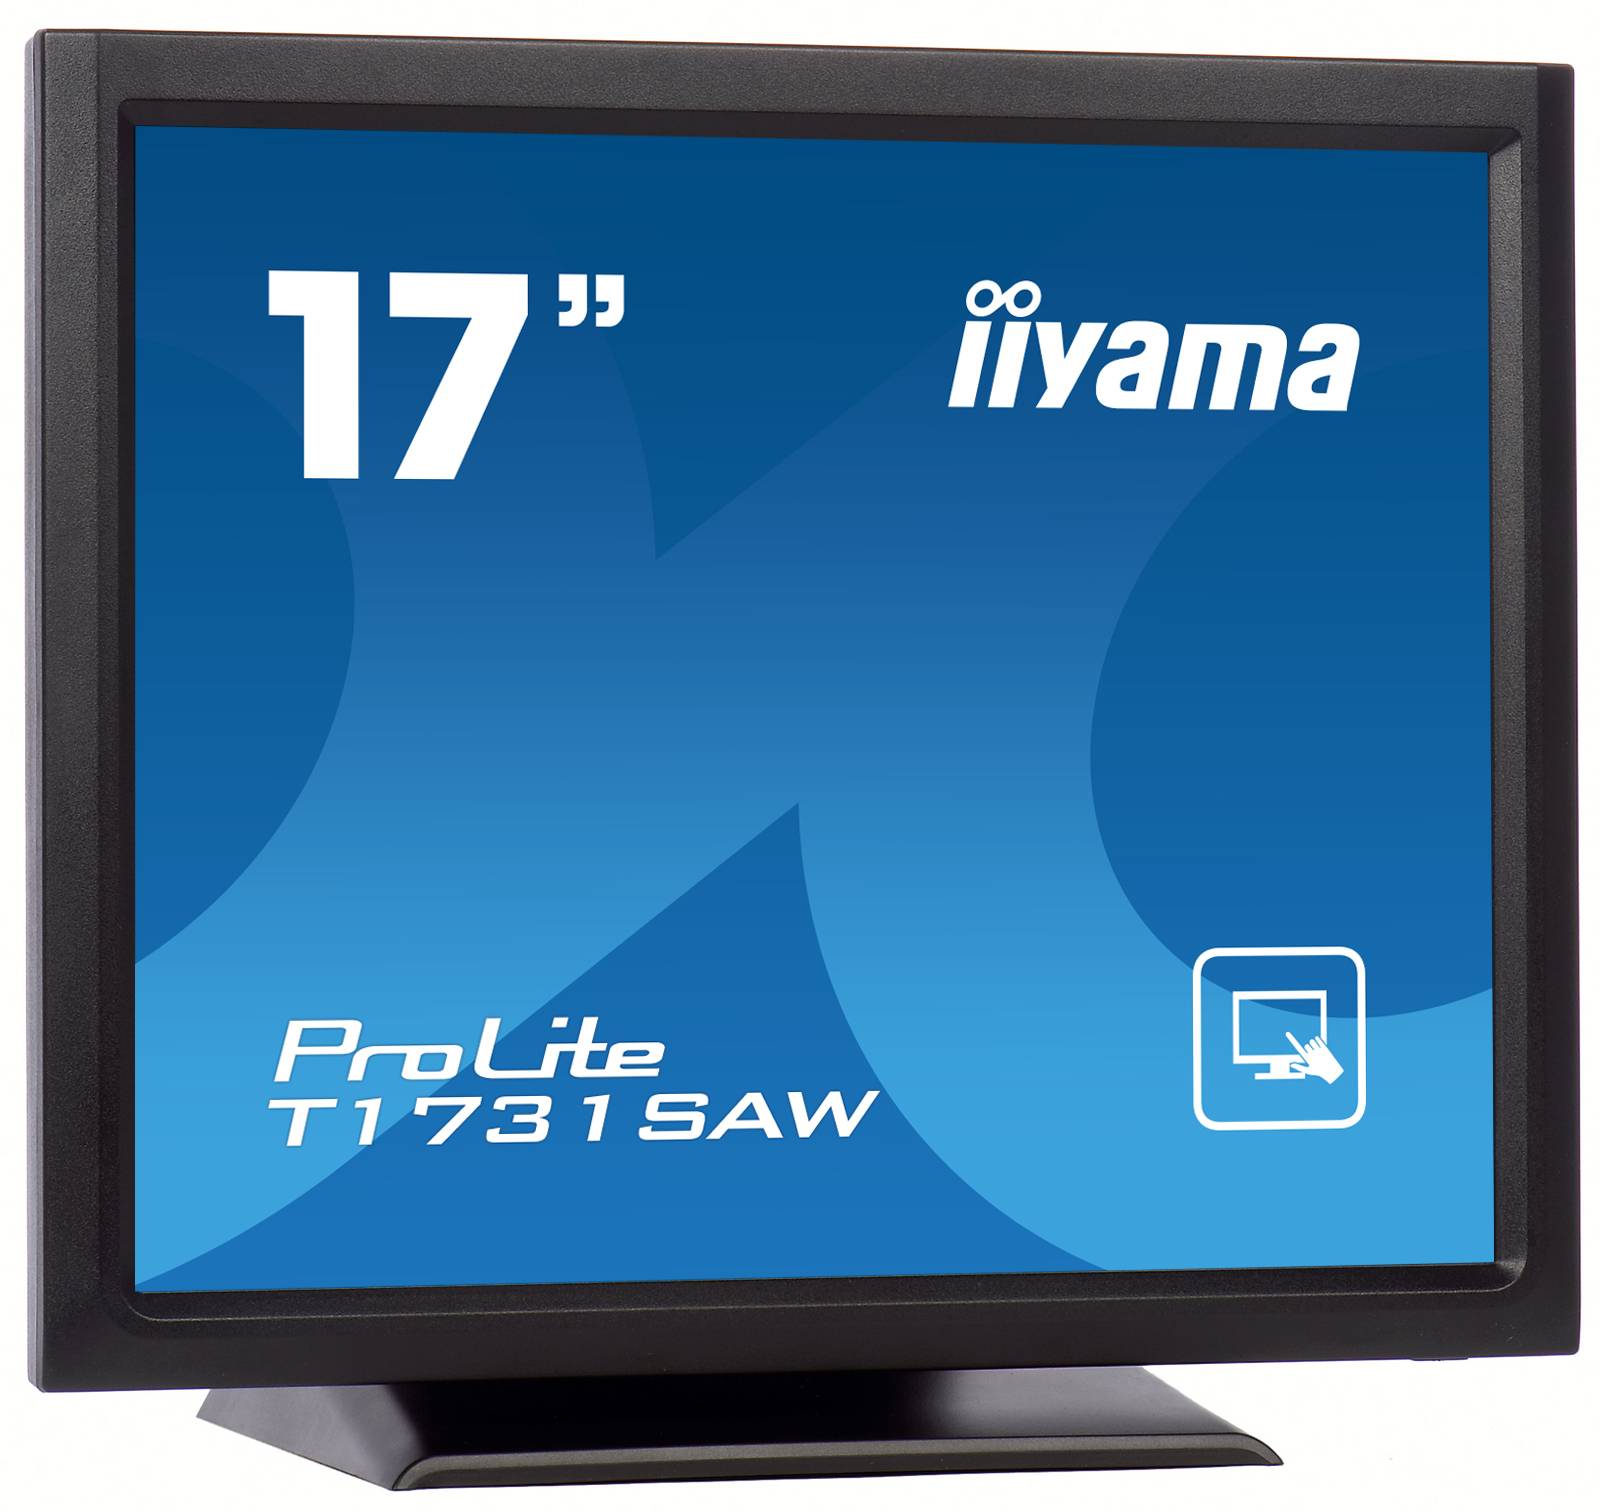 Rca Informatique - image du produit : 17IN LCD 1280X1024 16:9 1000:1 5MS RS232 AND USB